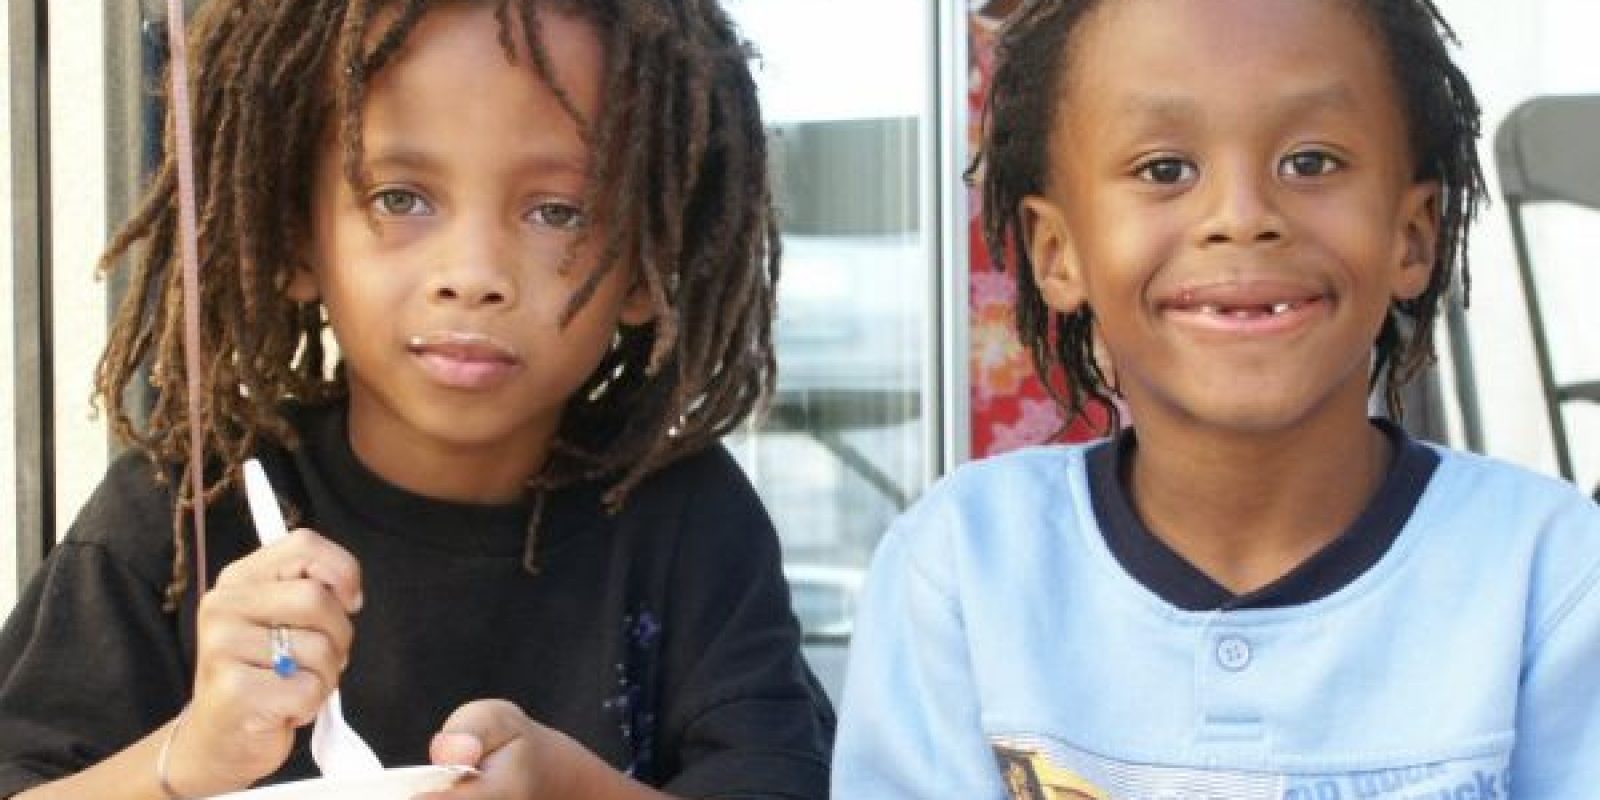 Little kids with Locs